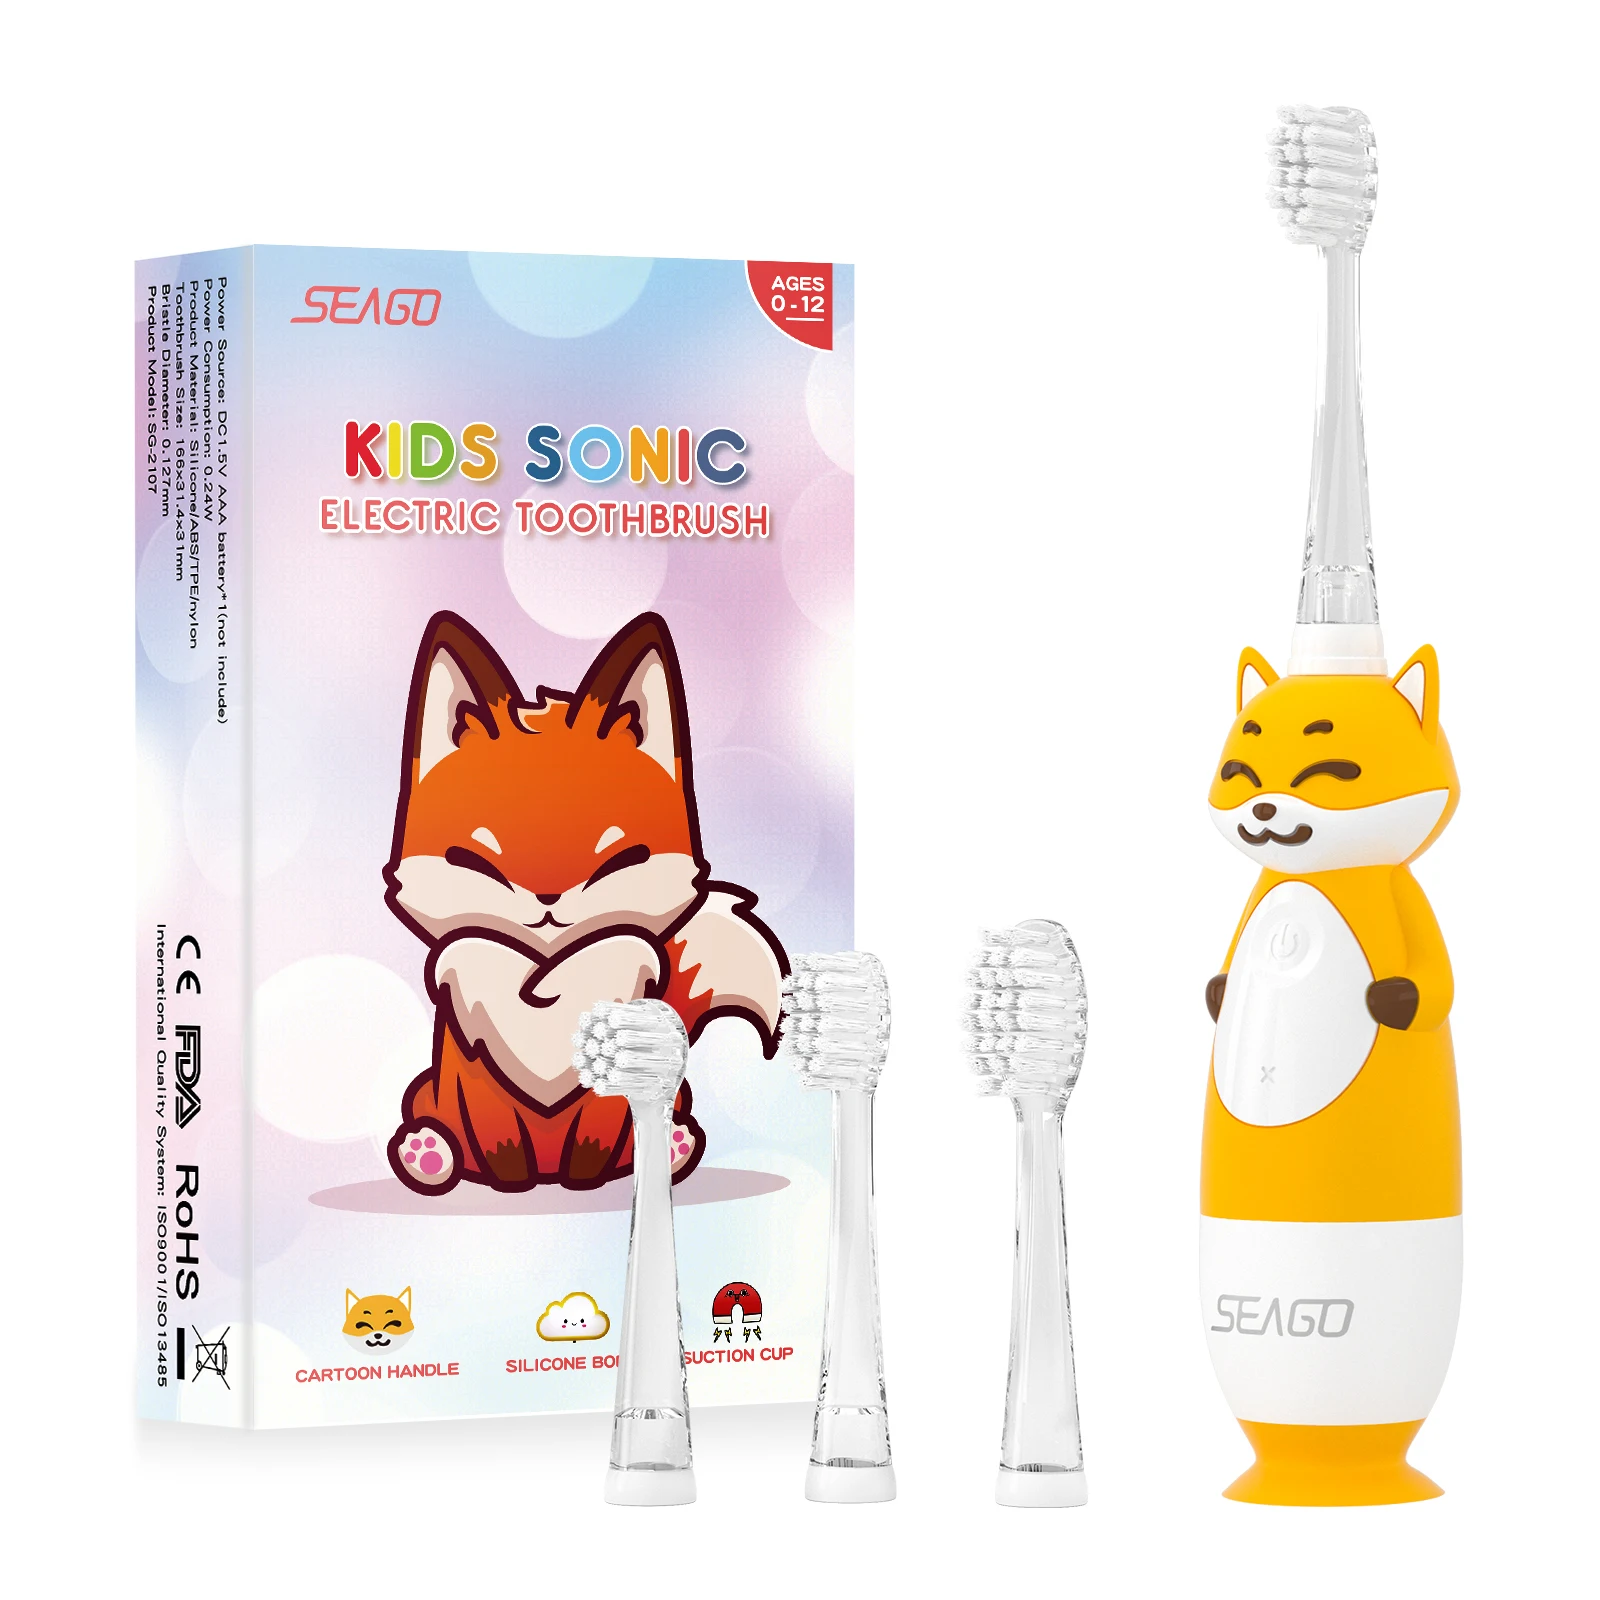 

SG2107 Animal LED Smart Timer Gentle Vibration Soft Teeth Brushing Sets Silicone Sonic Kids Children Electric Toothbrush